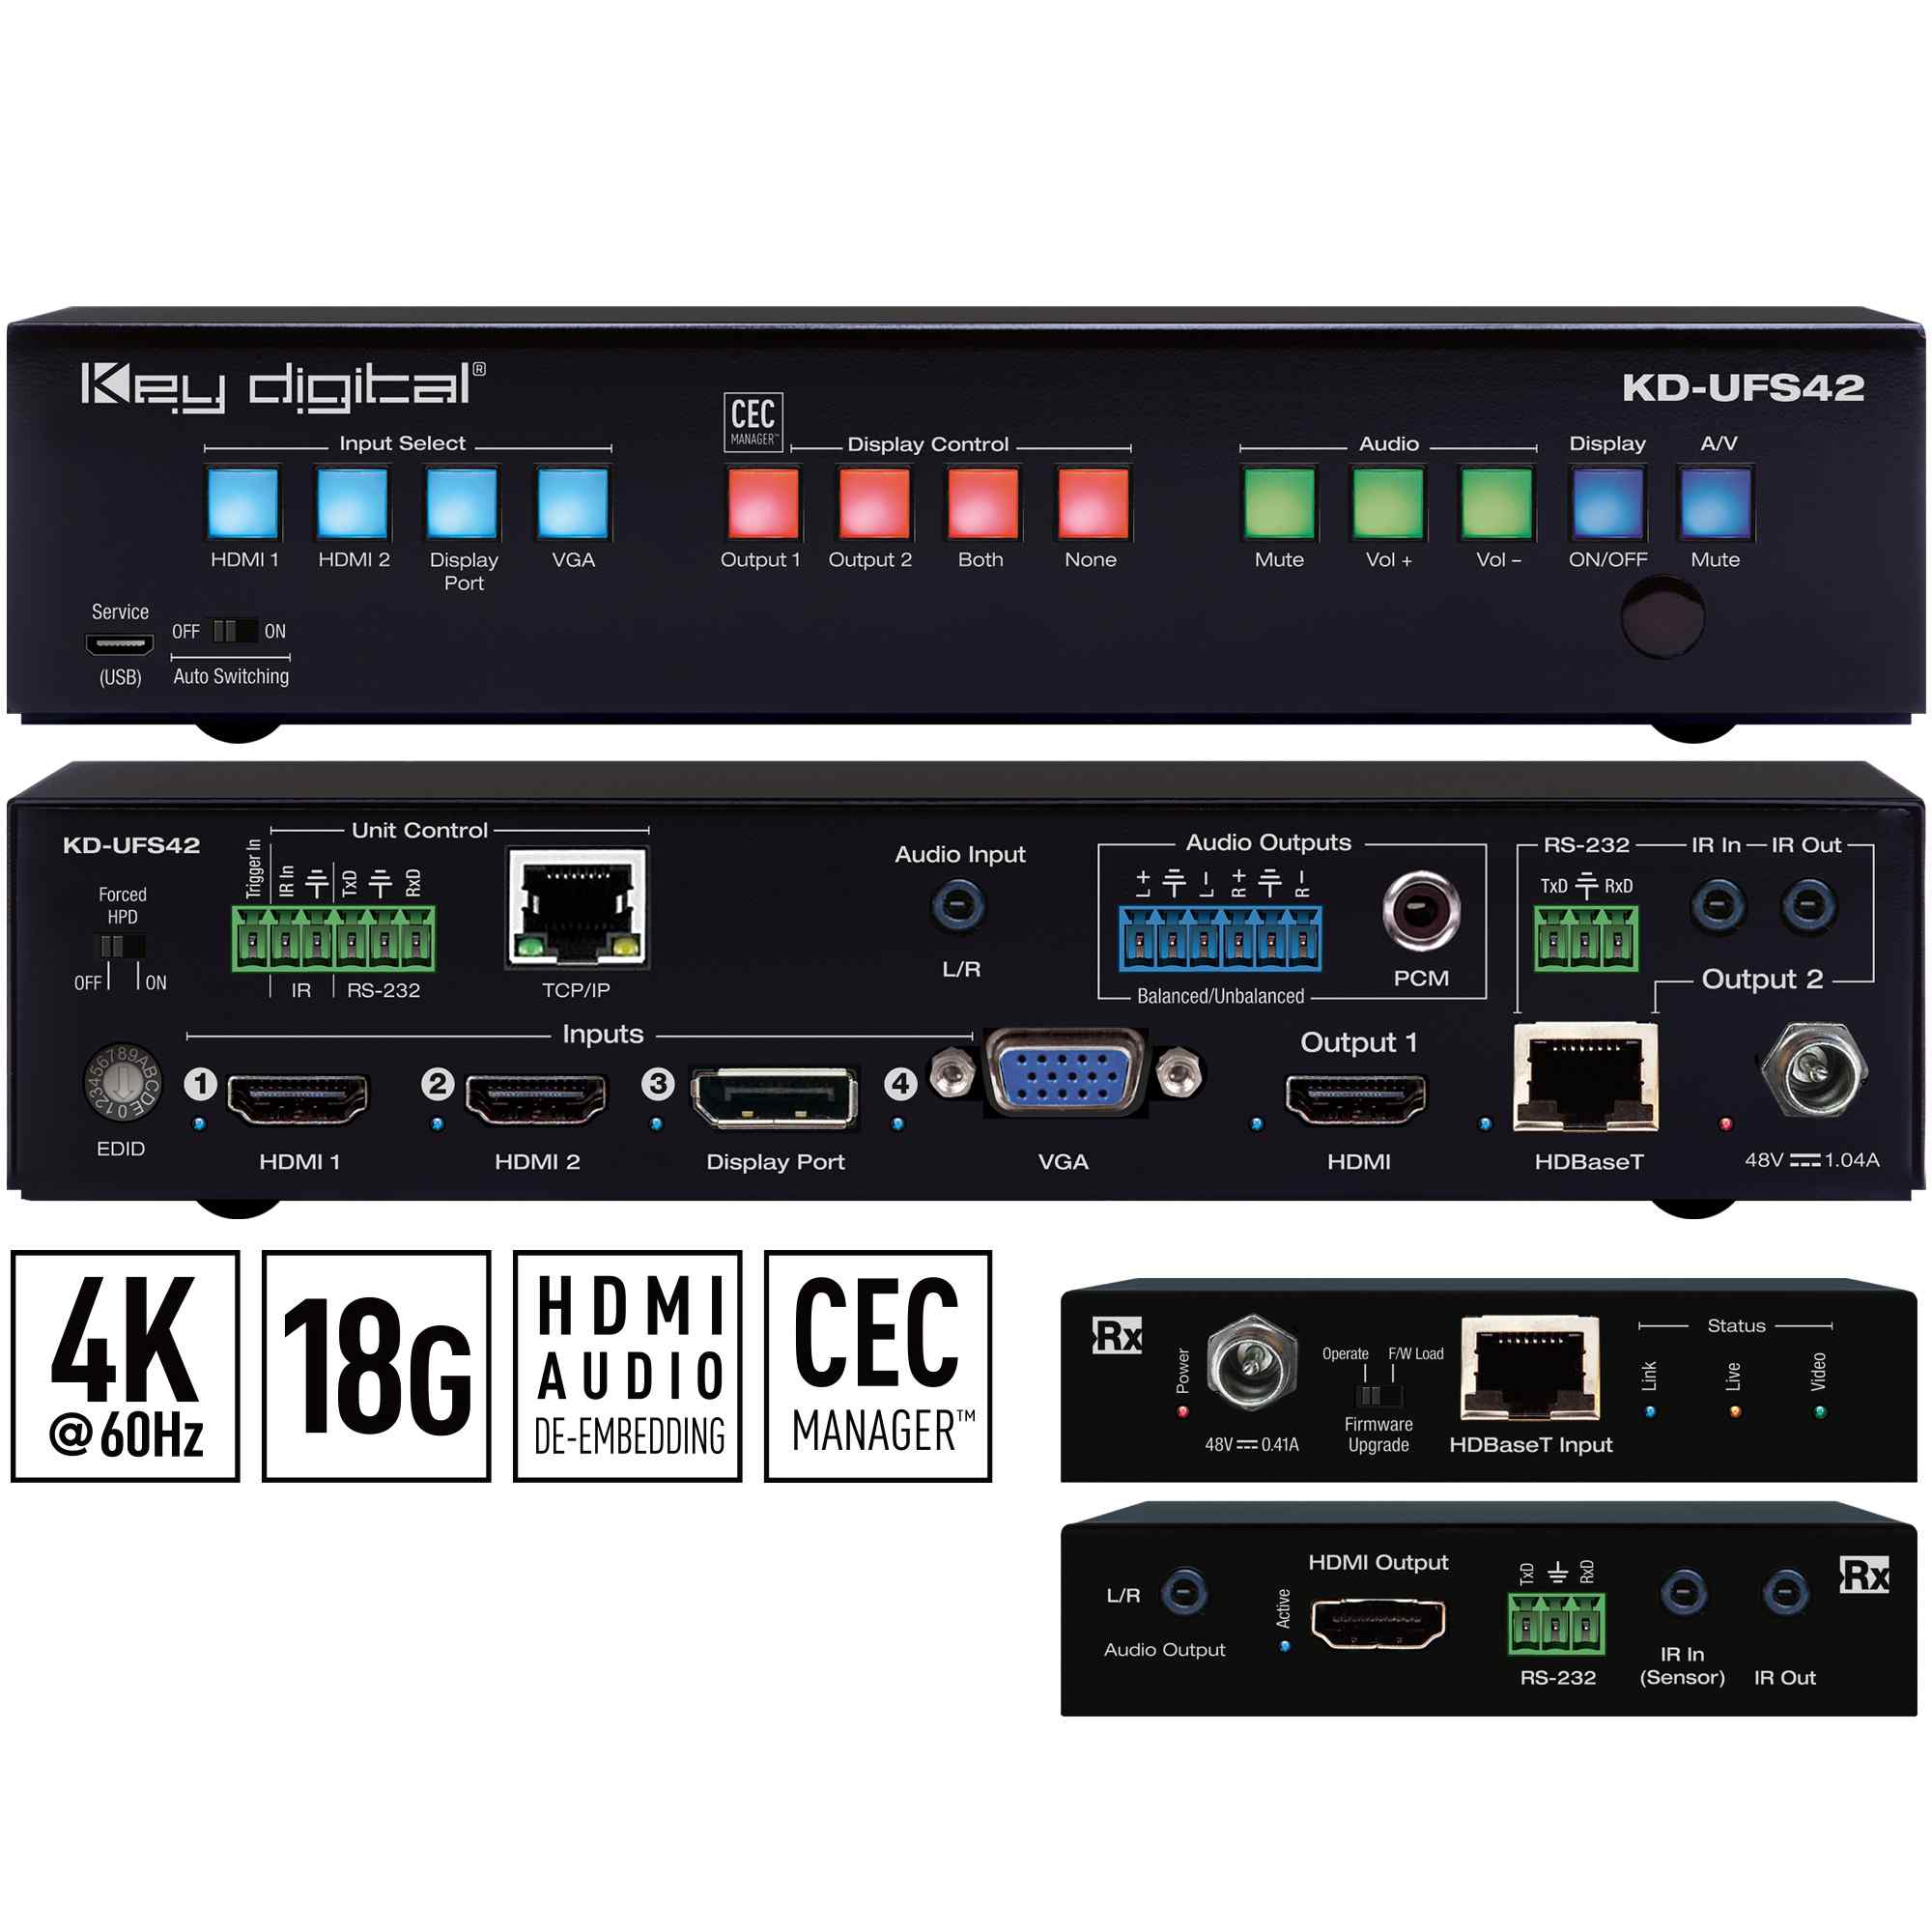 Key Digital  4K 18G (40m) Universal Format Switcher with 4 Inputs (2x HDMI, DP, VGA), HDMI and HDBaseT Mirrored Outputs with Rx Included, Audio De-Embed, CEC Display Control, Auto Switching. KD-App and KDPlug & Present™ Ready. - KD-UFS42